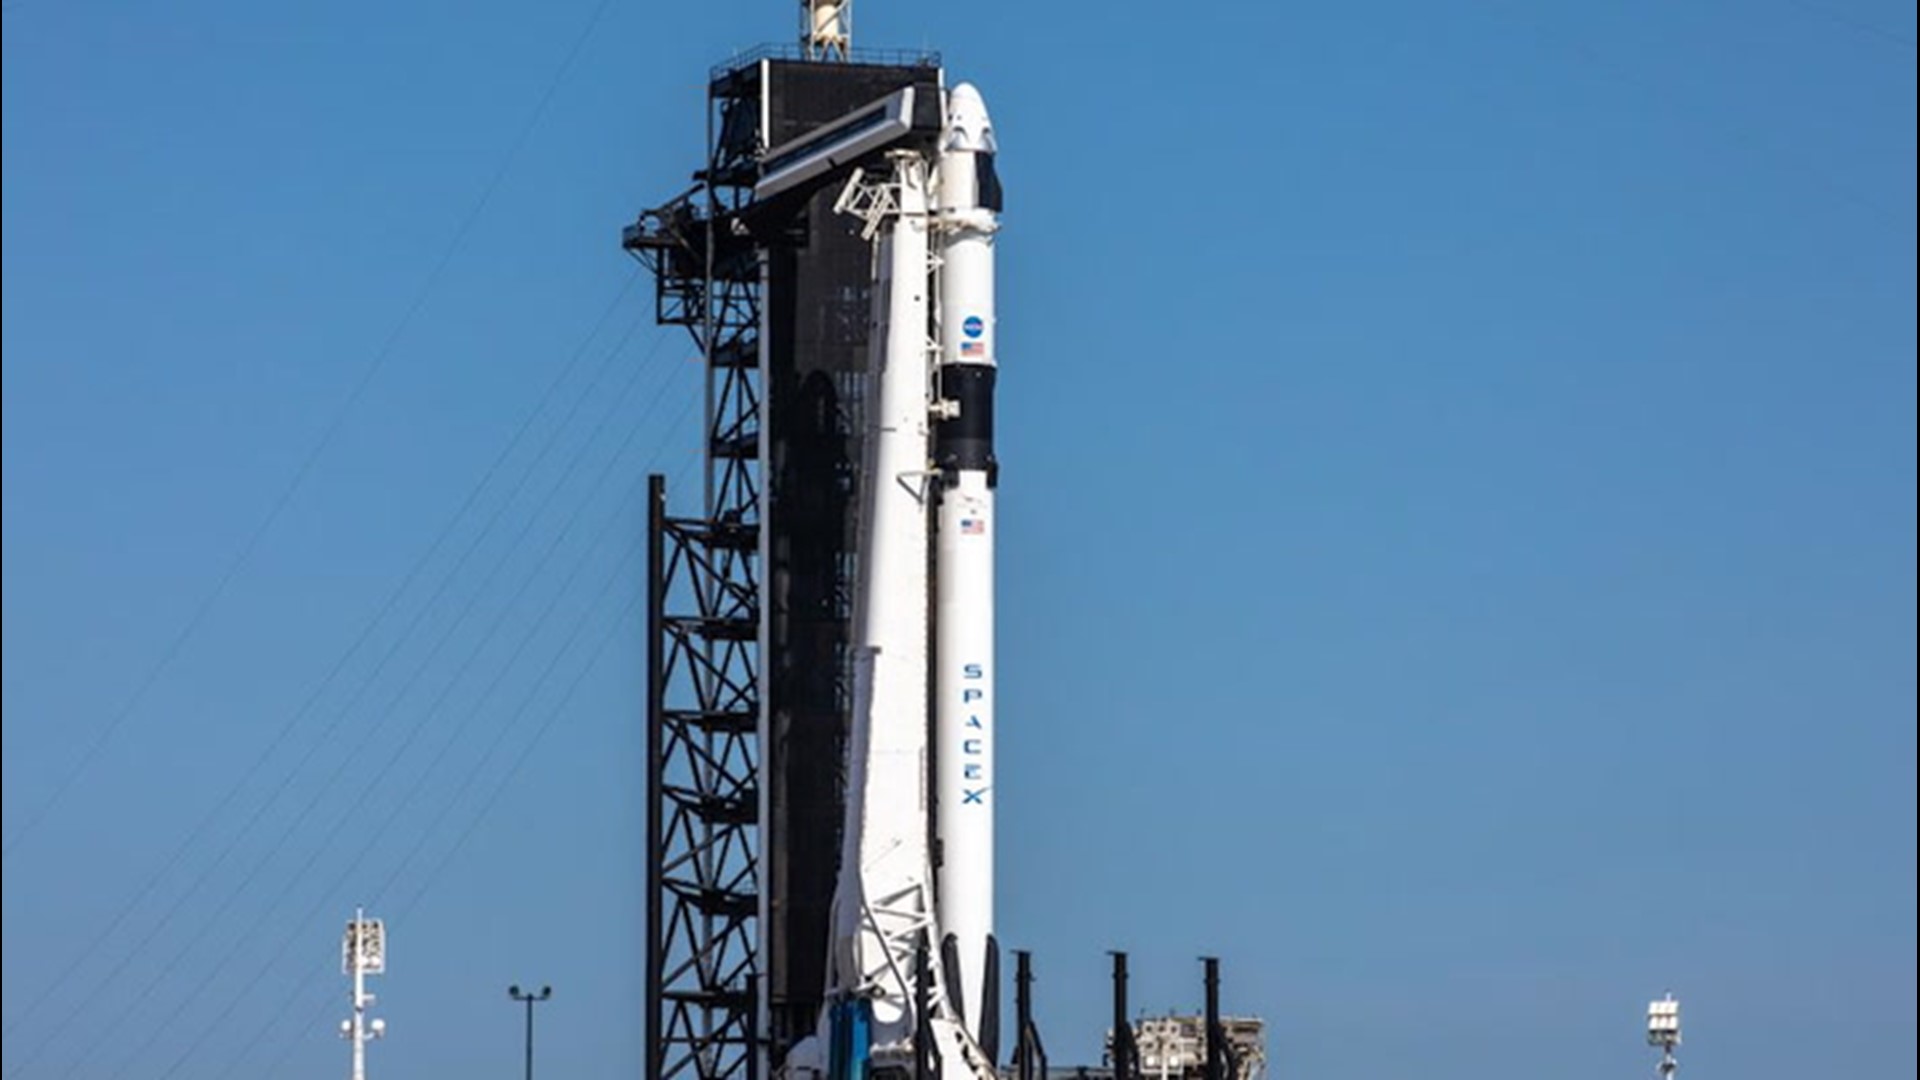 NASA and SpaceX received the green light to perform a historic launch in Cape Canaveral, Florida, as part of their joint venture on Wednesday, May 27.